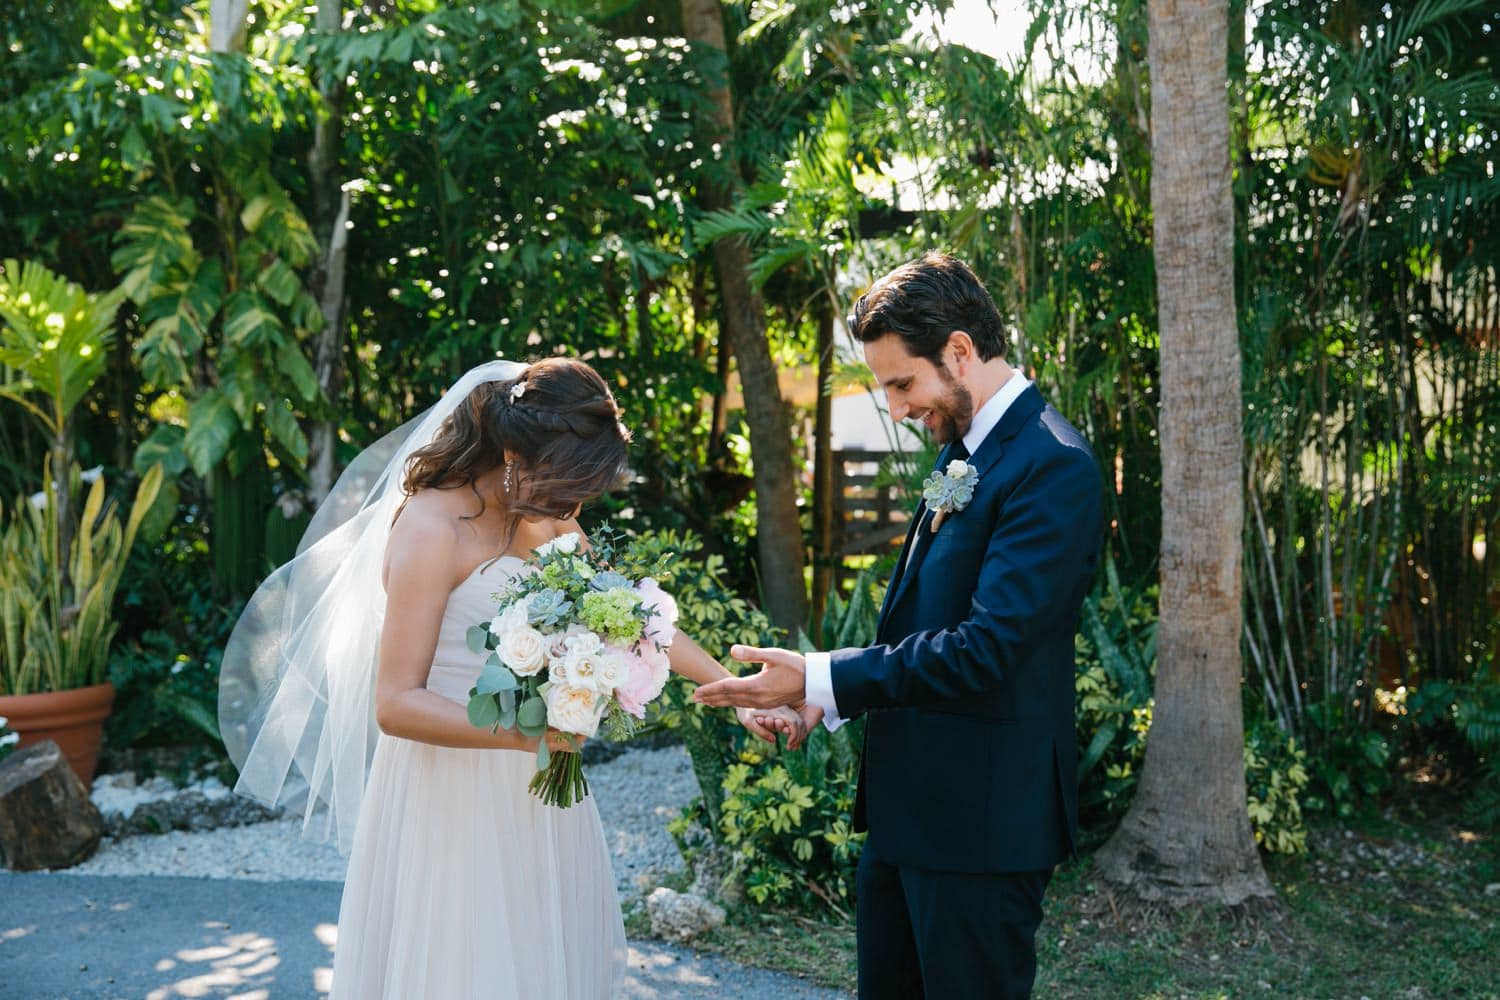 First looks are the cutest! Miami Garden Wedding. 